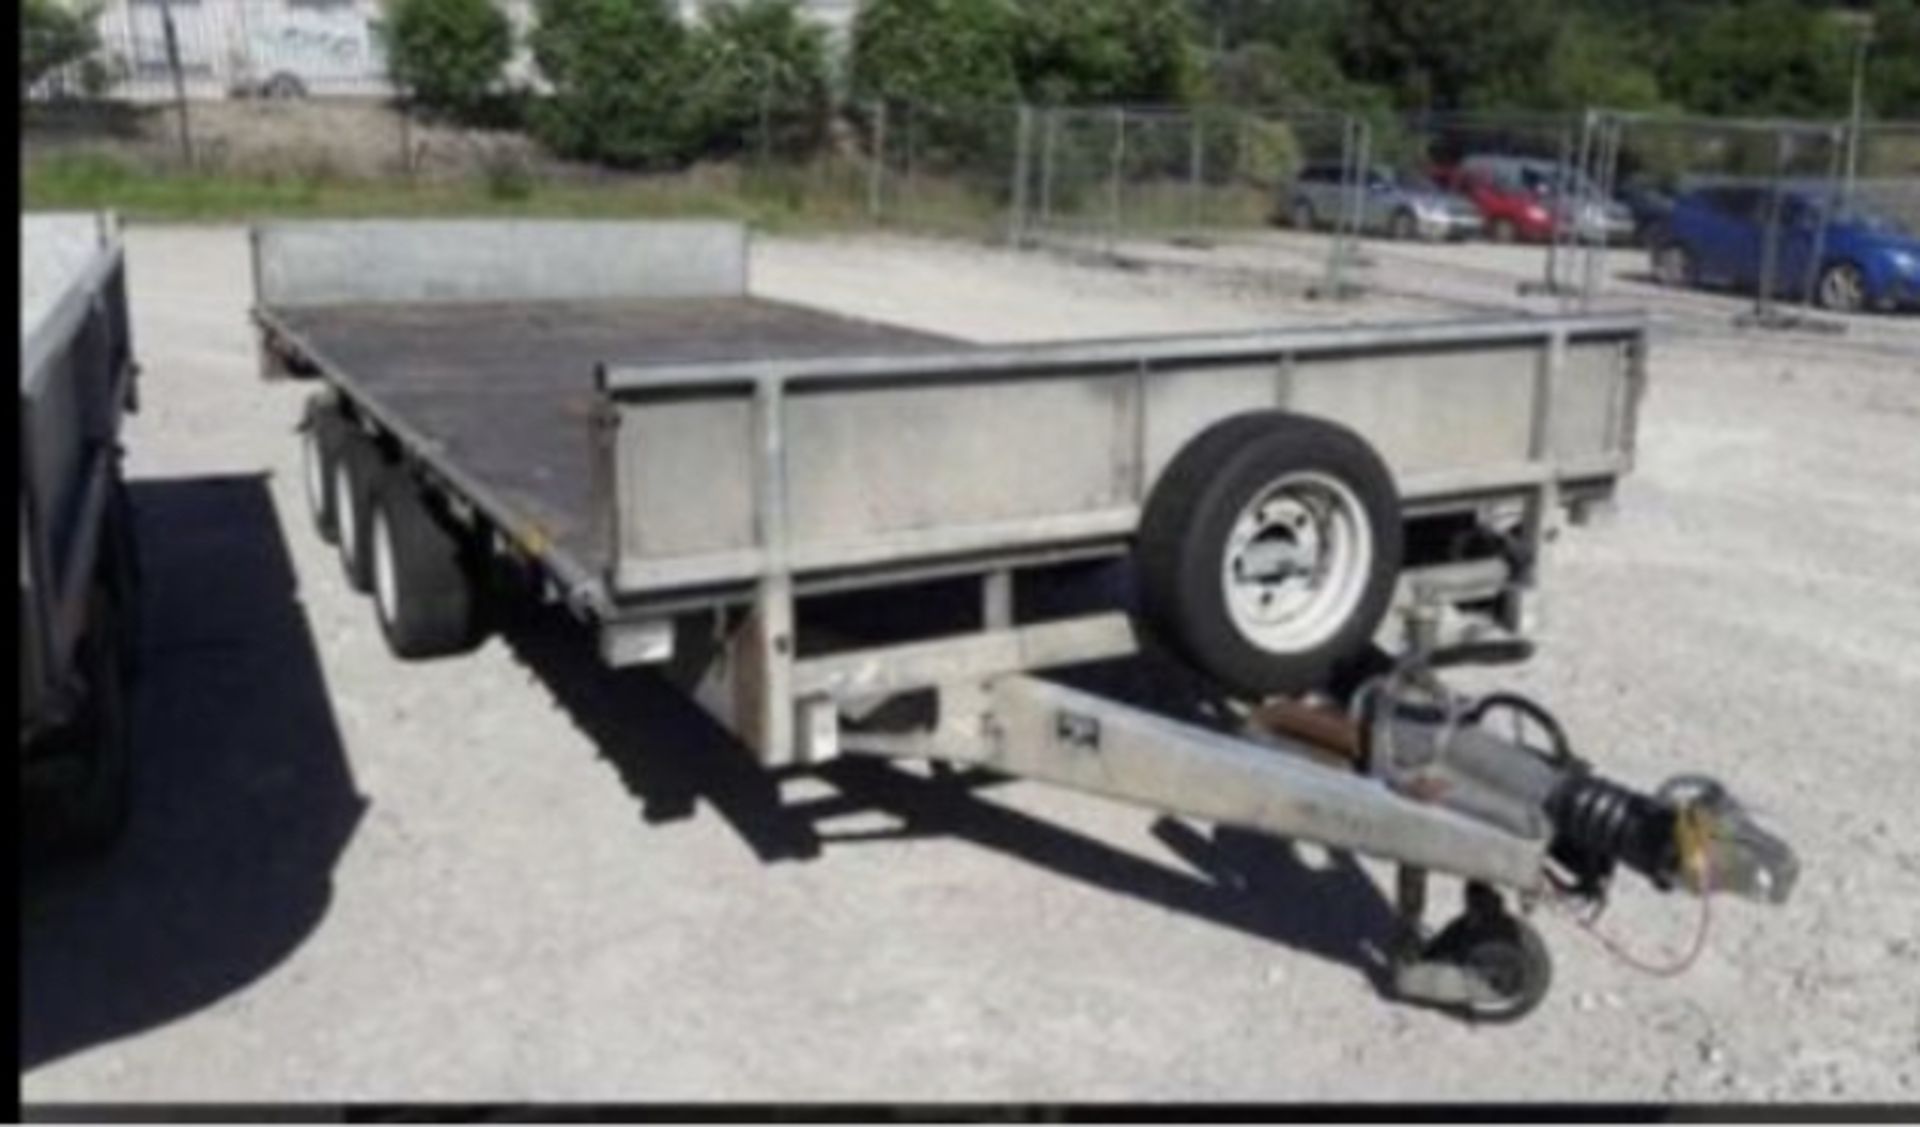 IFOR WILLIAMS LM187G TRI AXLE FLATBED TRAILER. LOCATION: NORTHERN IRELA ND